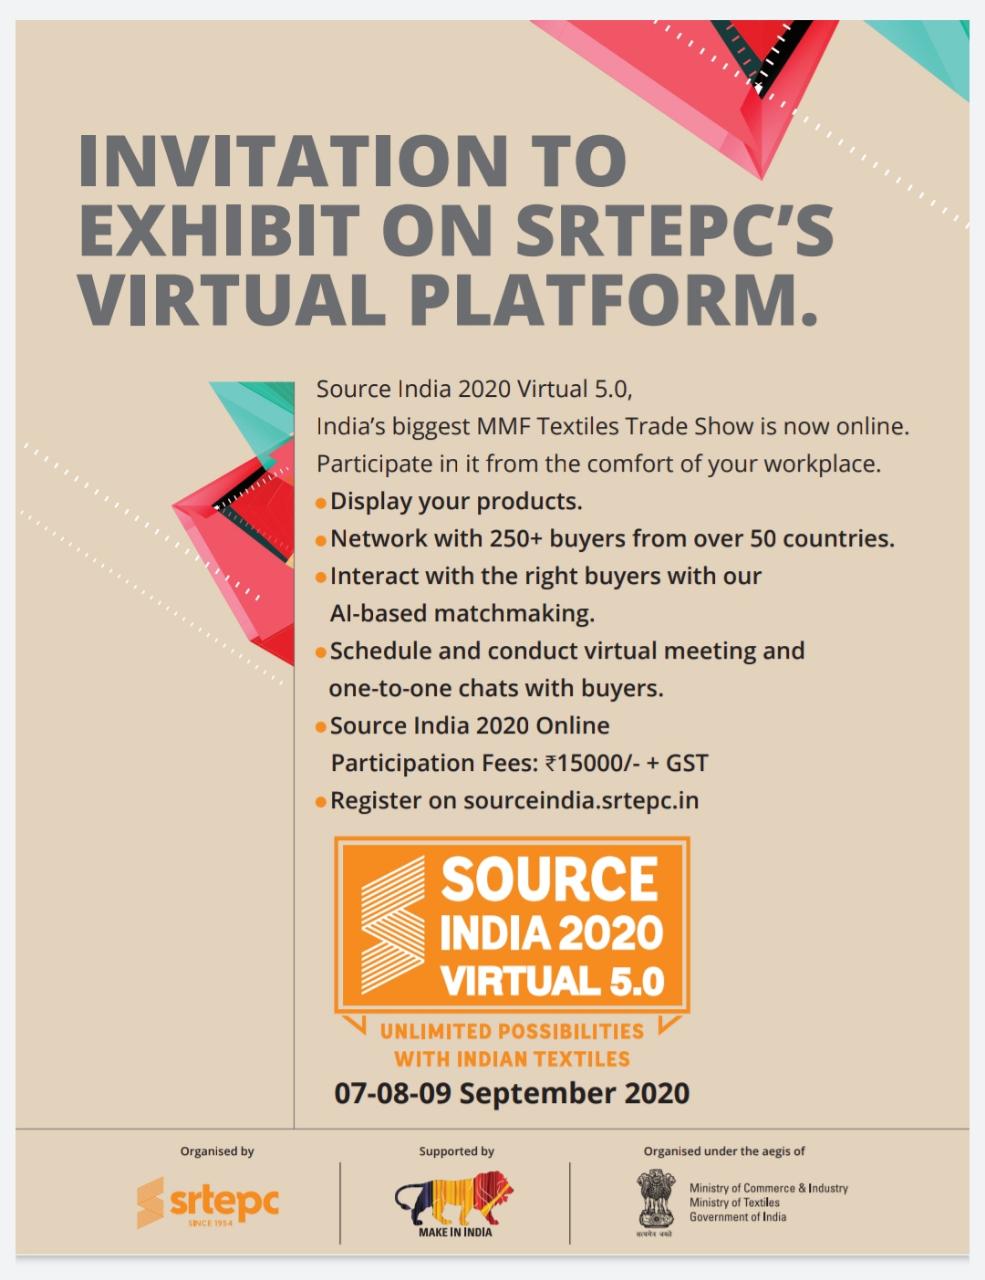 Webinar on Virtual Exhibition on 28th Aug 2020 (Friday) at 11:30 am